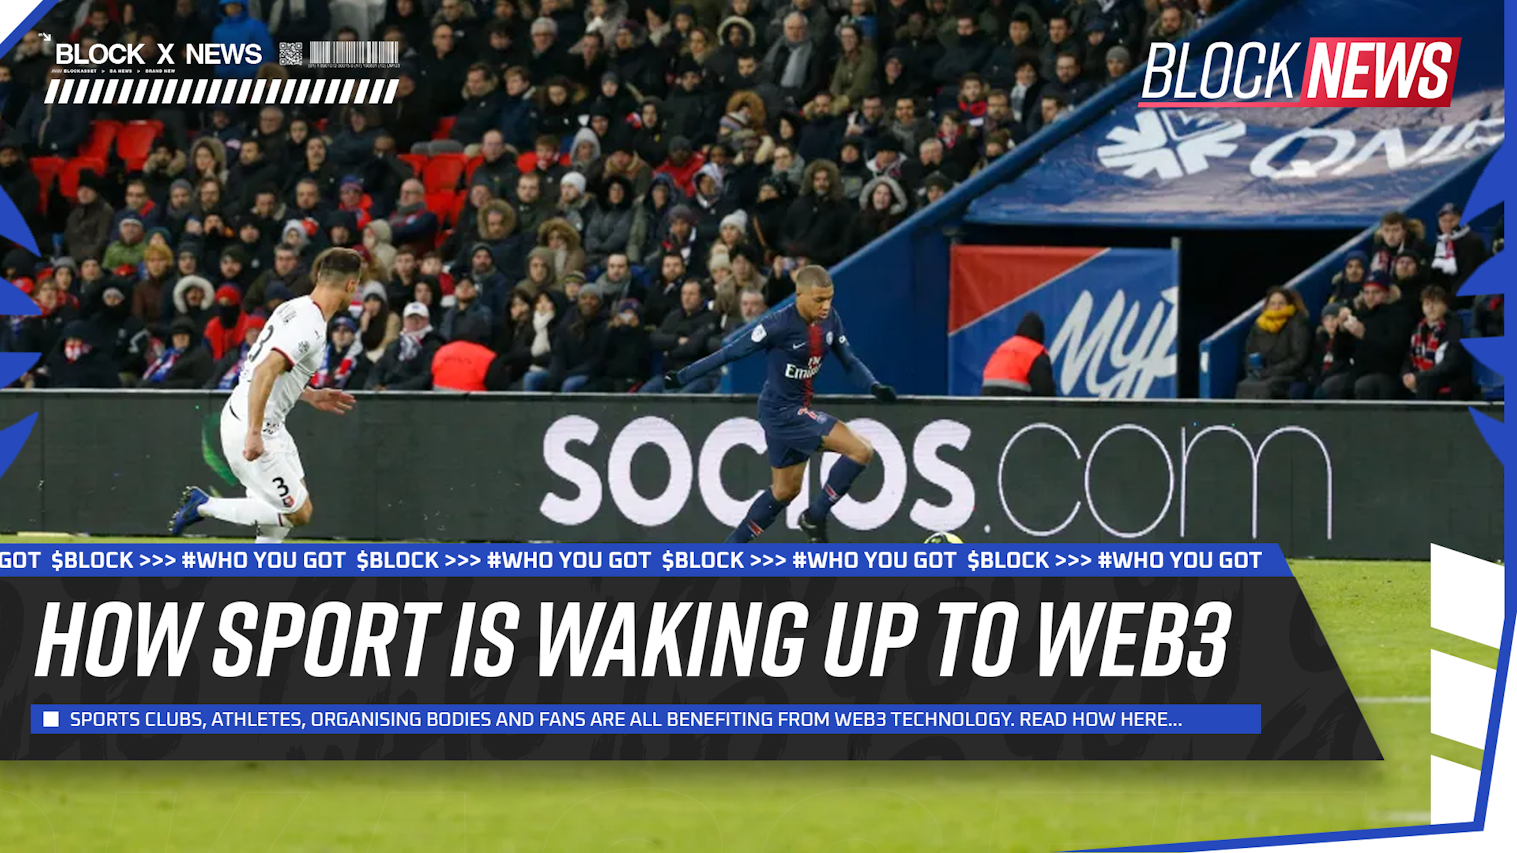 More clubs and athletes are waking up to the benefits of Web3 technology